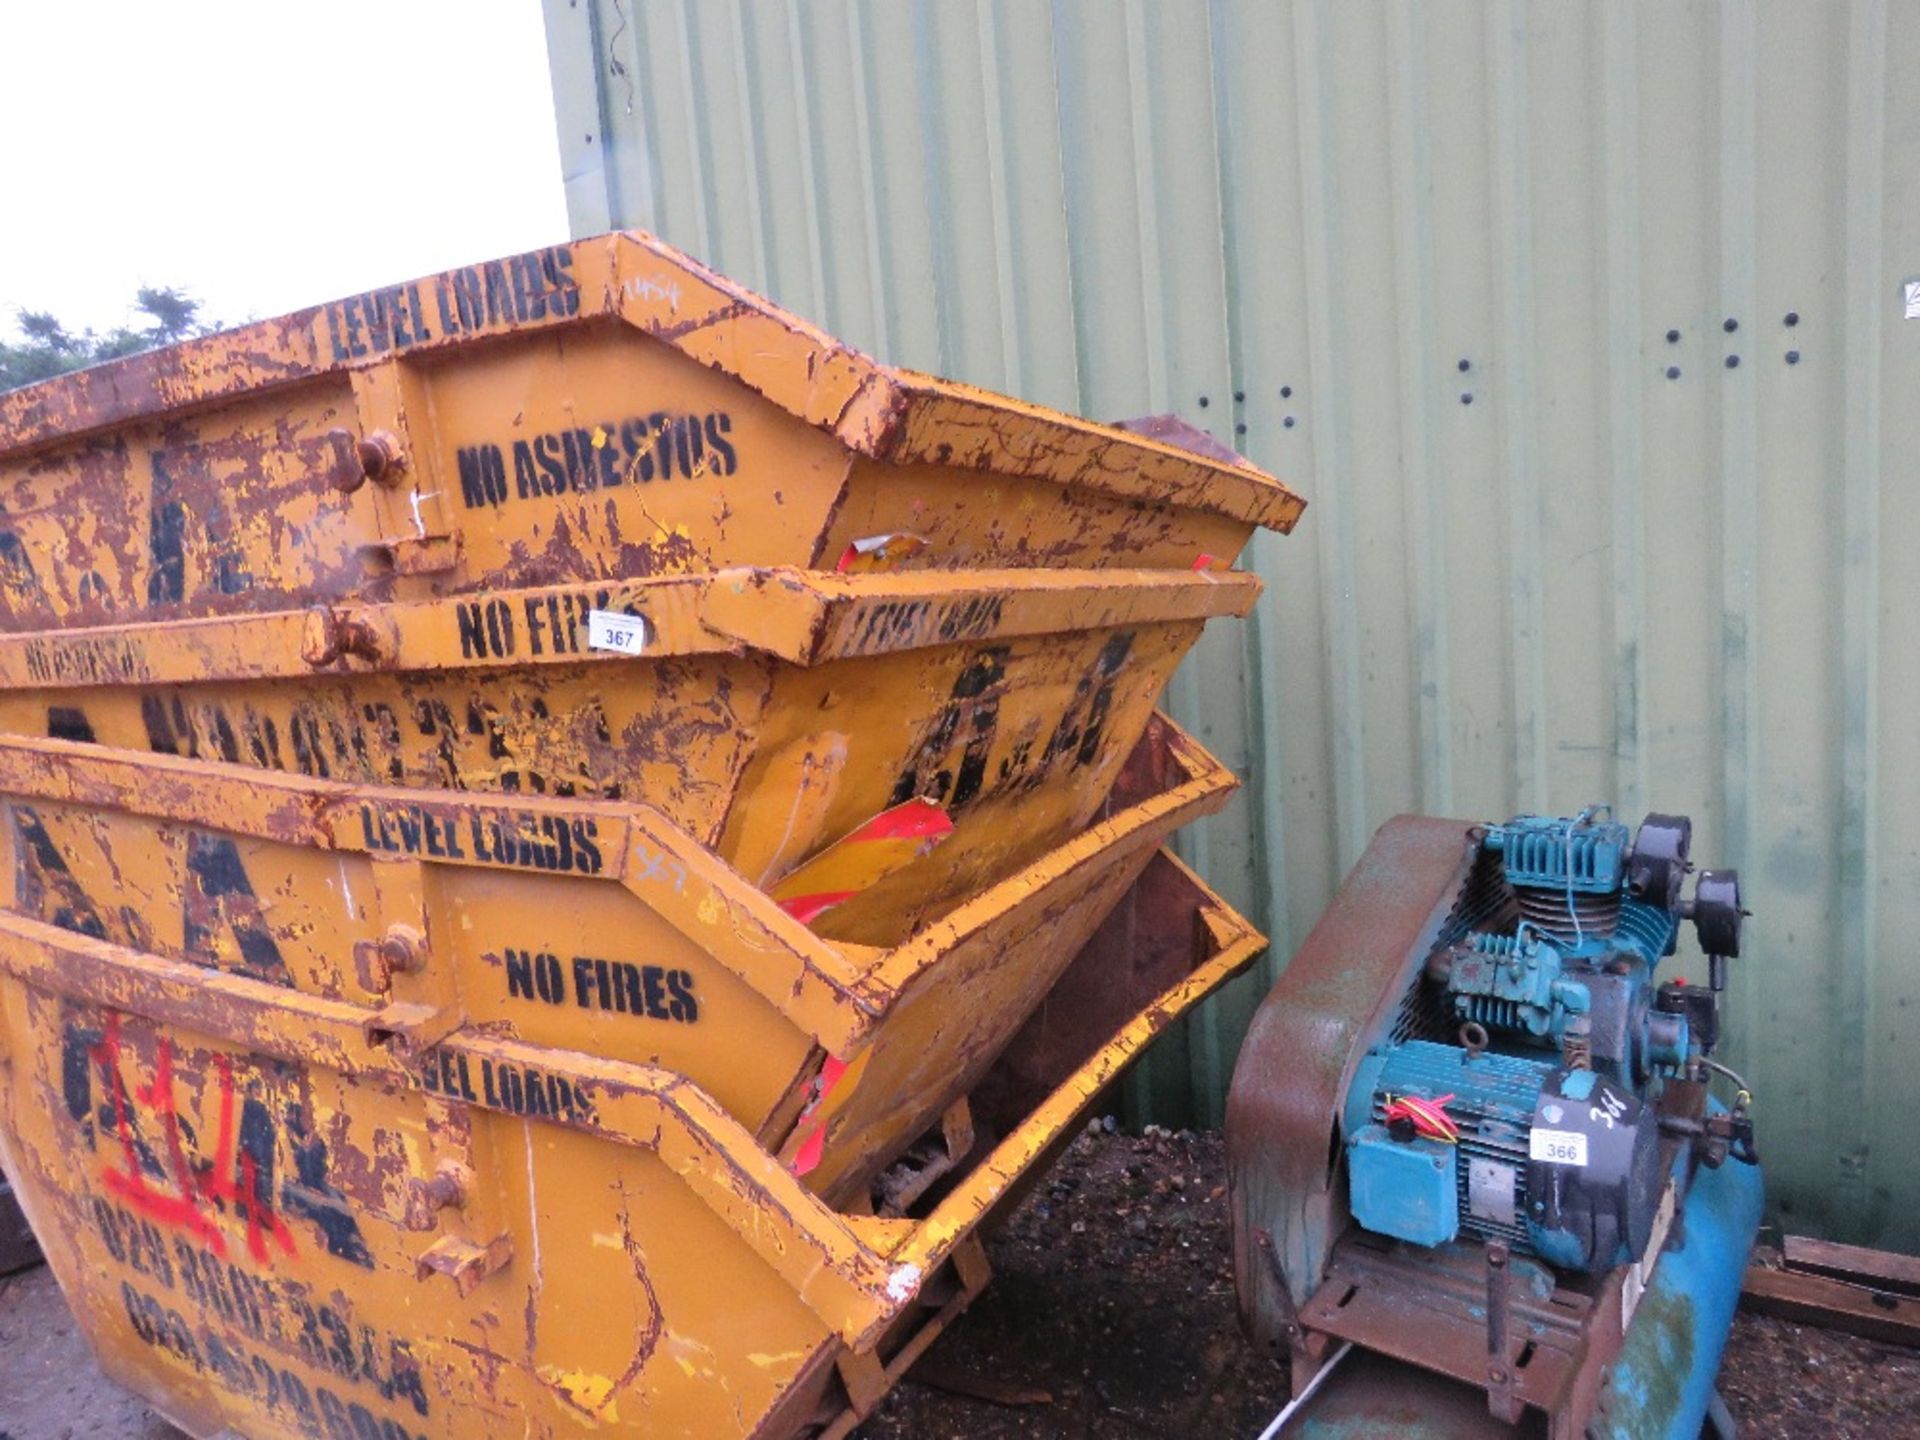 STACK OF 4 X CHAIN LIFT SKIPS, FLOORS LOOKED SOUND FROM INITIAL INSPECTION. - Image 2 of 4